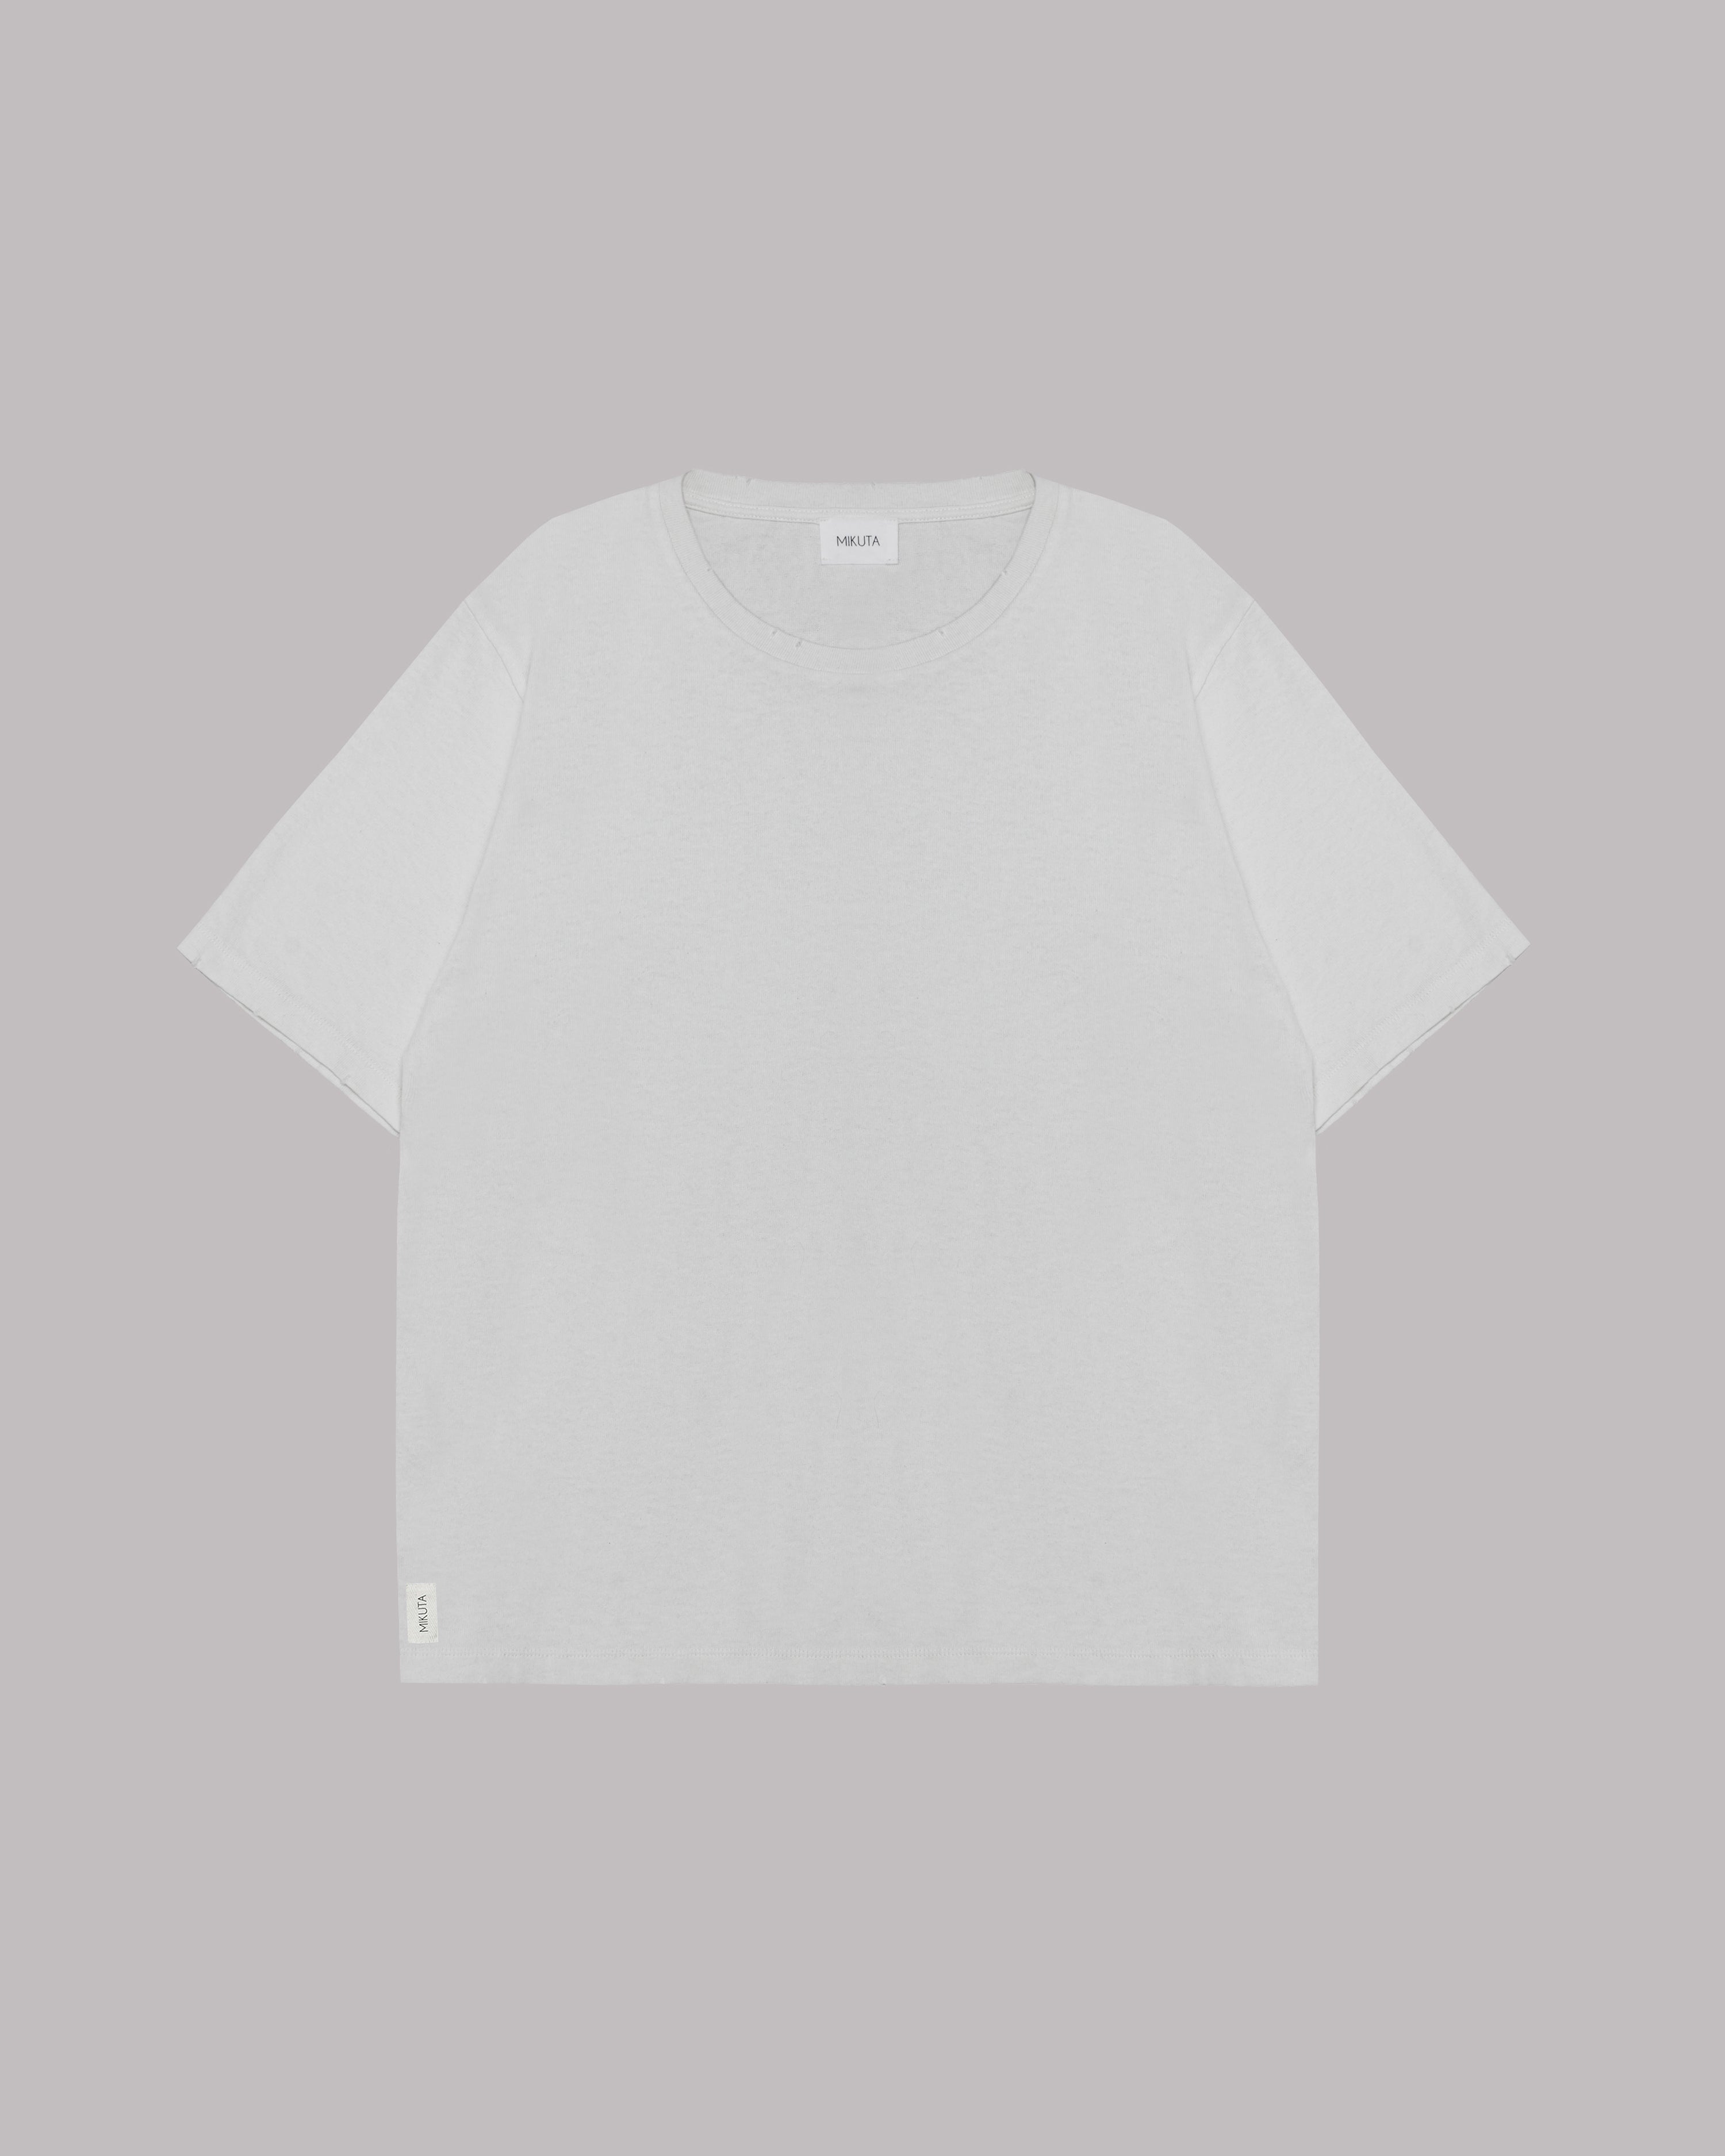 The Off White Dry Cotton Vintage T-Shirt